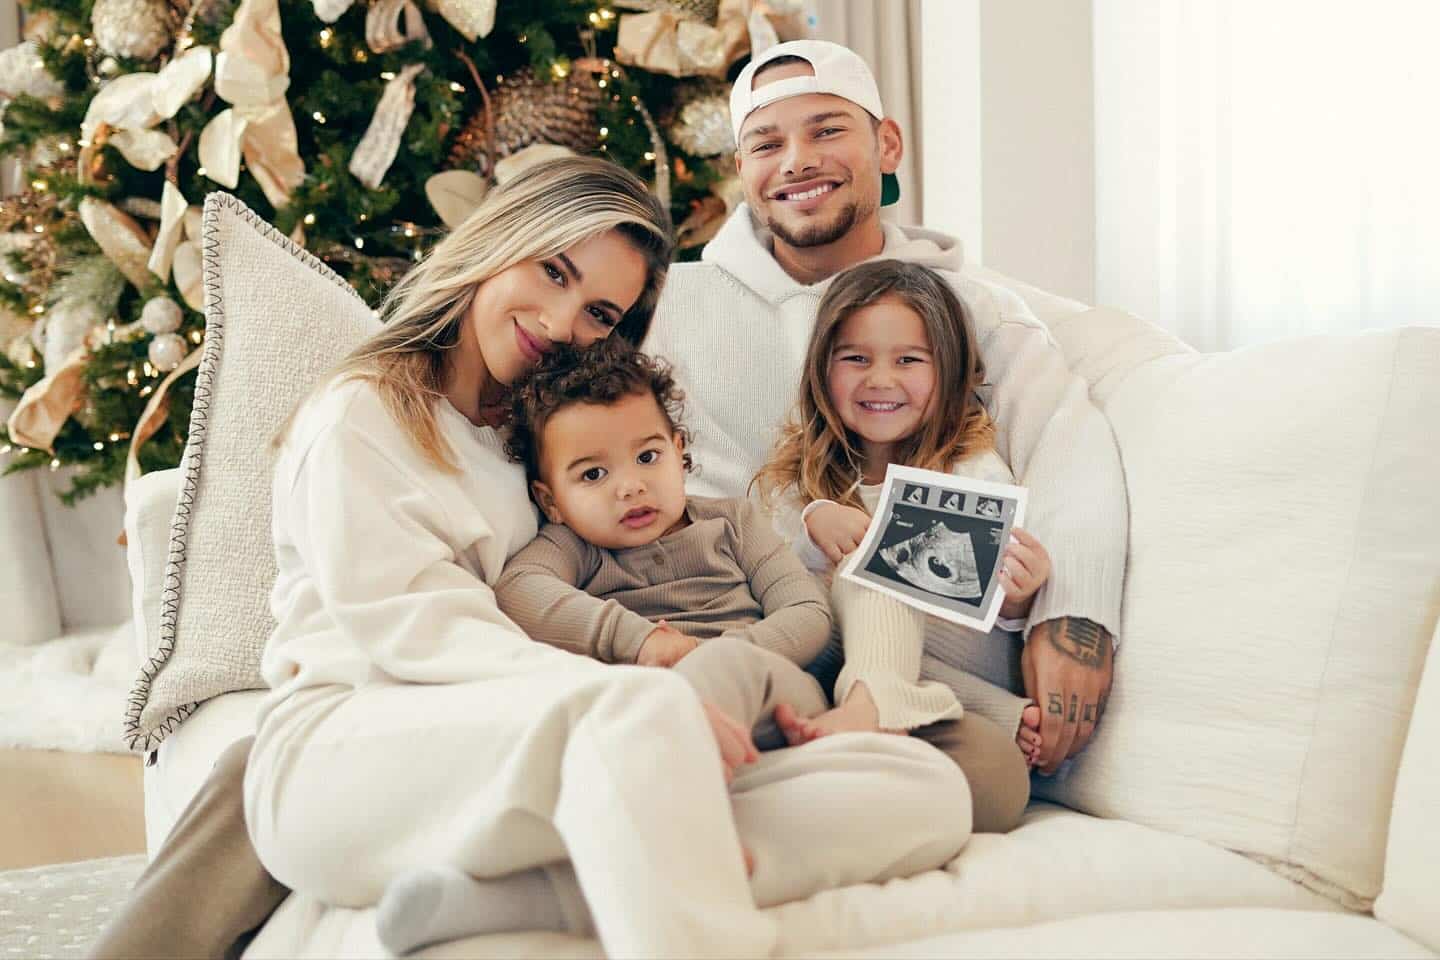 Kane Brown and his wife Katelyn are getting ready to welcome Baby #3